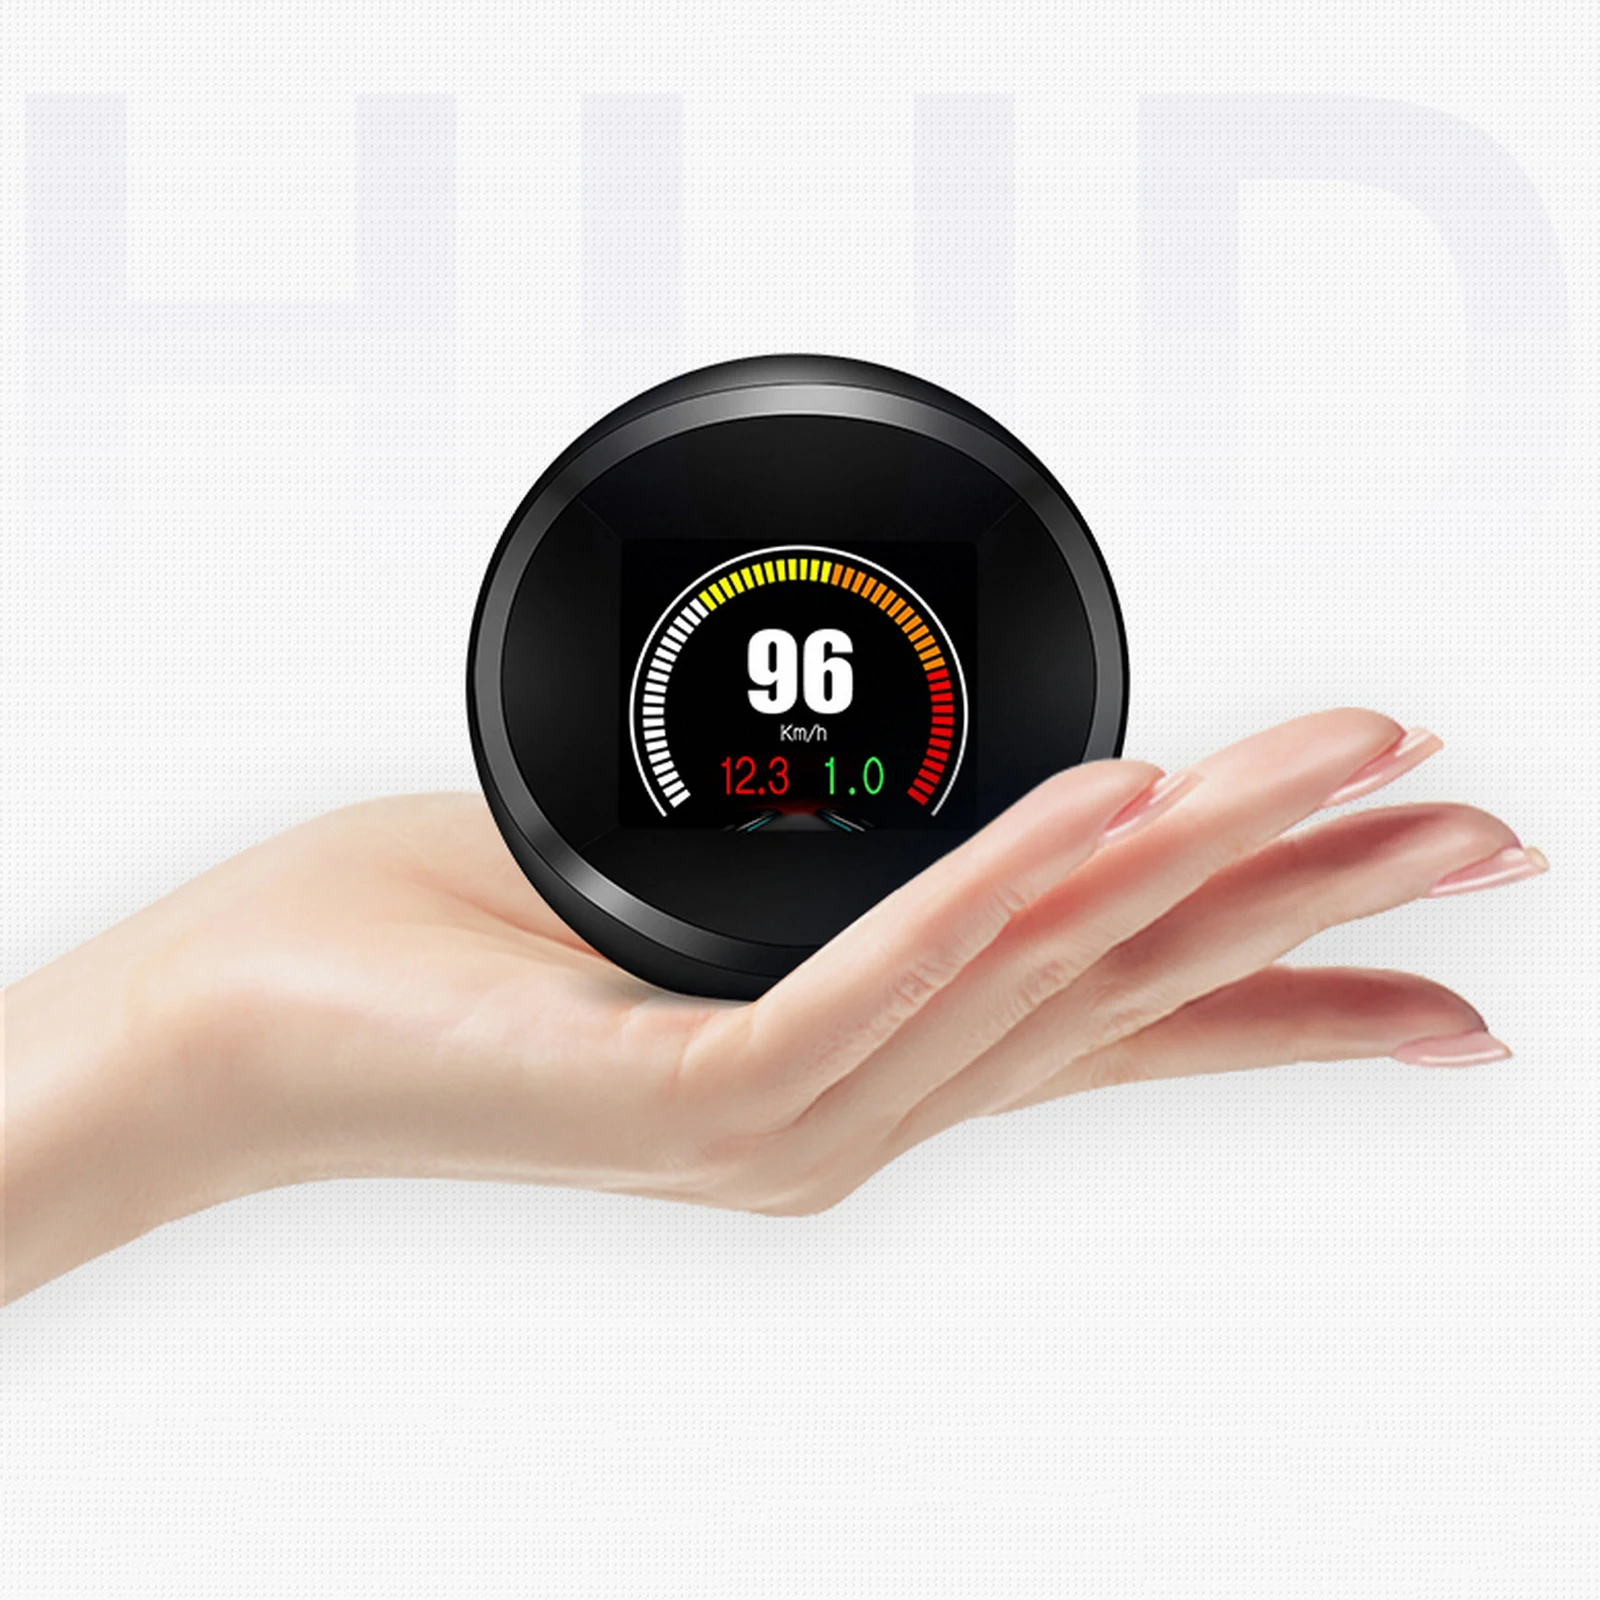 

Auto Hud Display 3.5" Car Projector in The Car Alarm EOBD OBD2 Head Up Display Speedometer Windshield Car Electronic Accessories